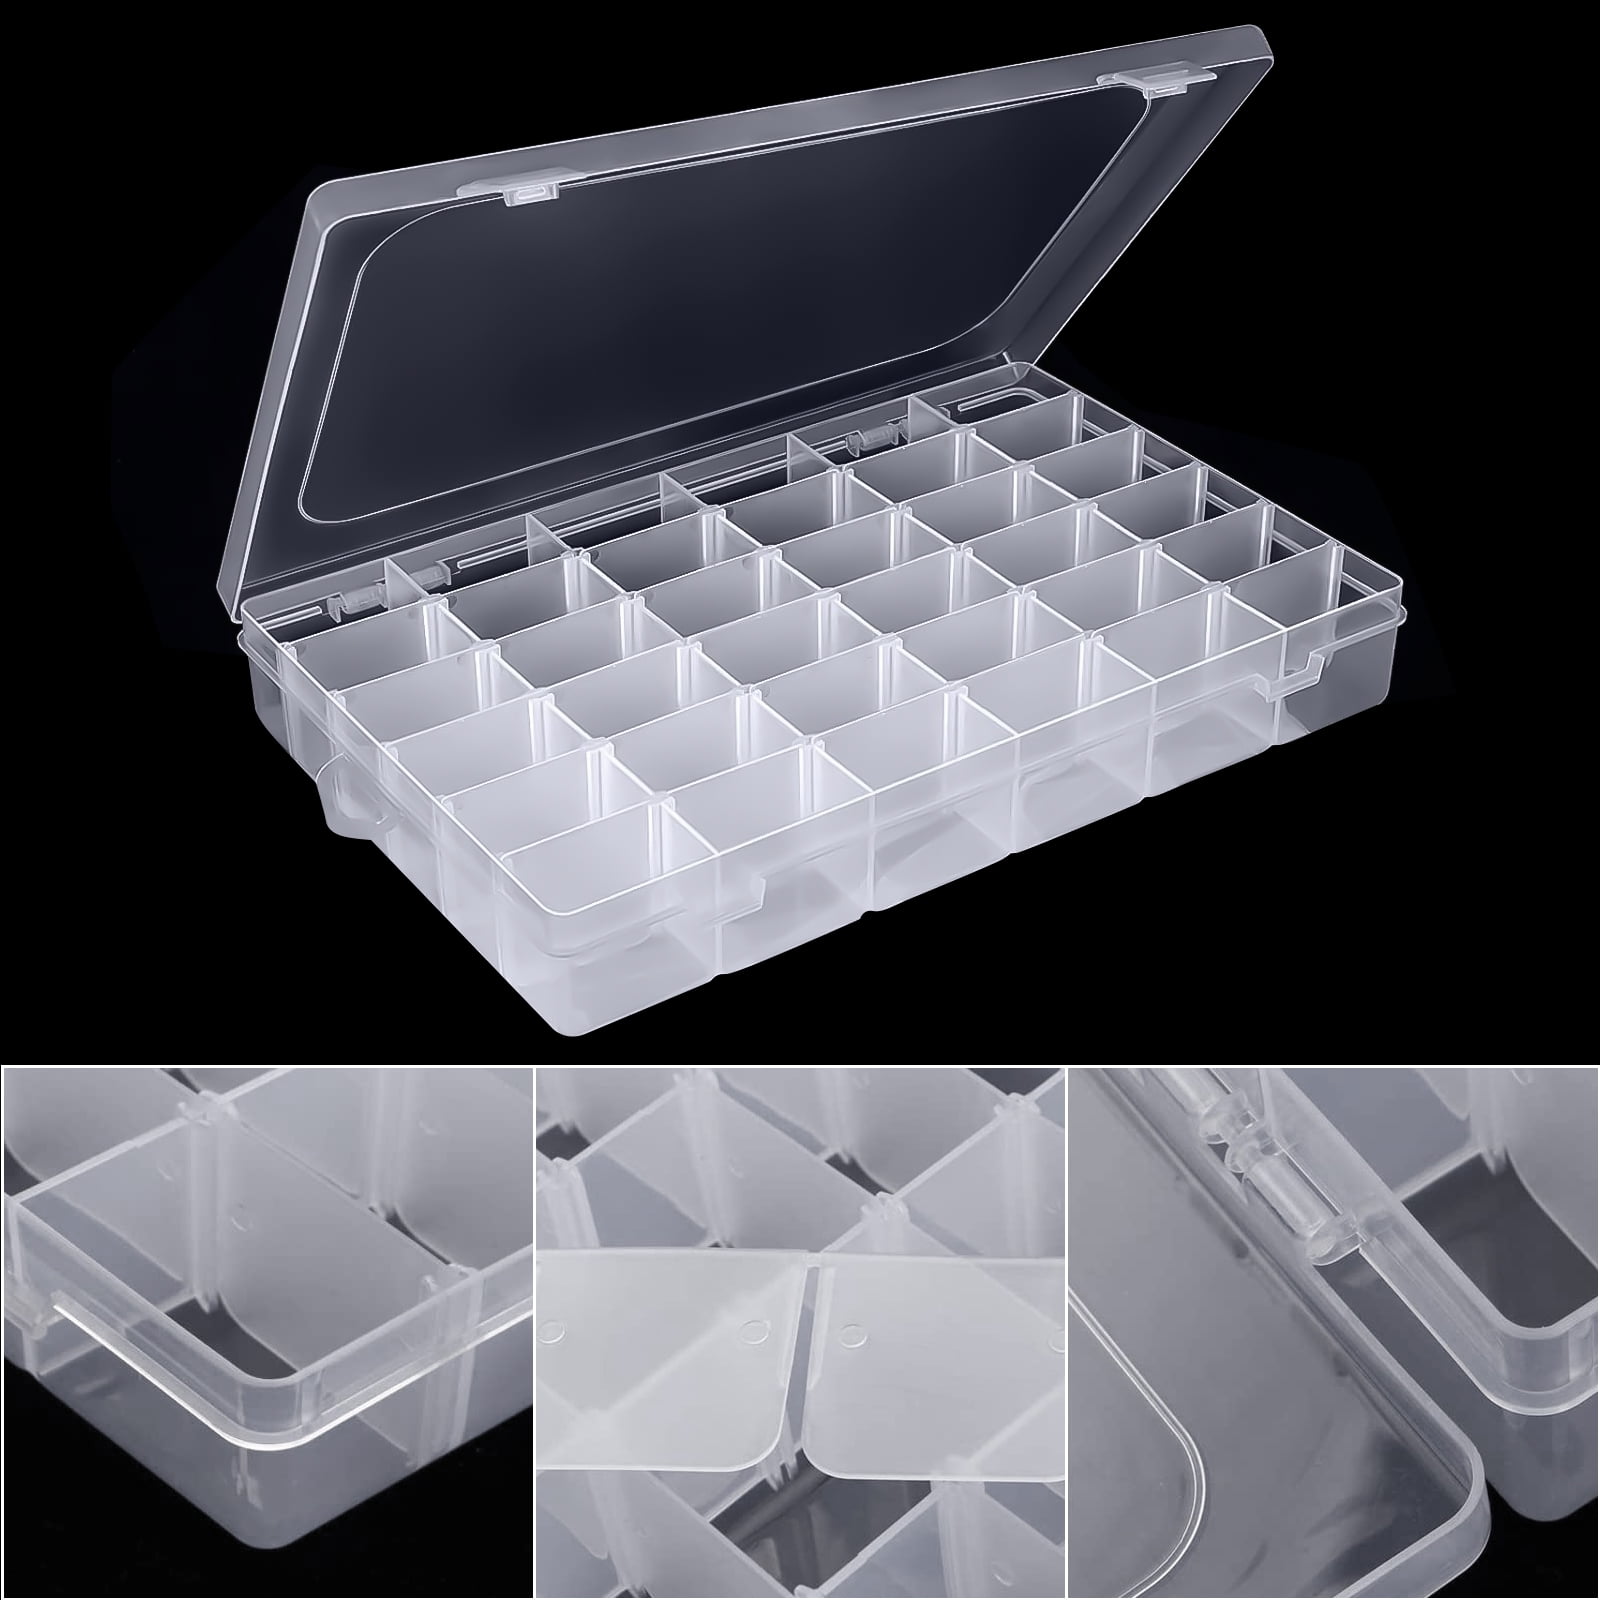 Jewelry DIY Crafts 10.8x7x1.7 inch Sewing Bead 36 Grids Clear Organizer Box Plastic Compartments Storage Container with Dividers for Ribbon Thread Fishing Tackles 